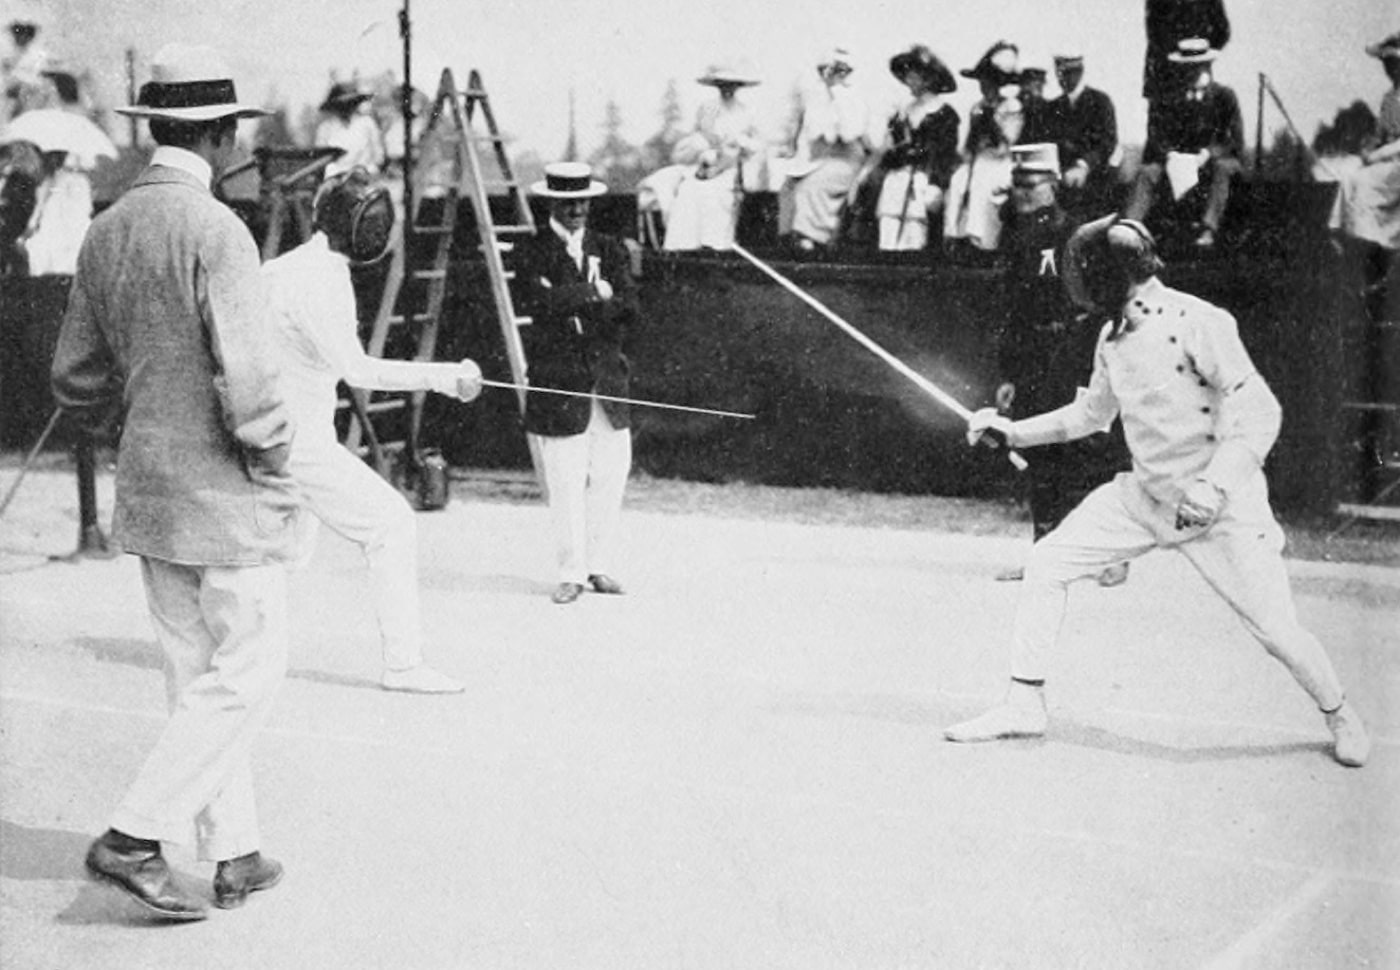 In this photograph we see George Patton in a fencing match at the 1912 Olympics.